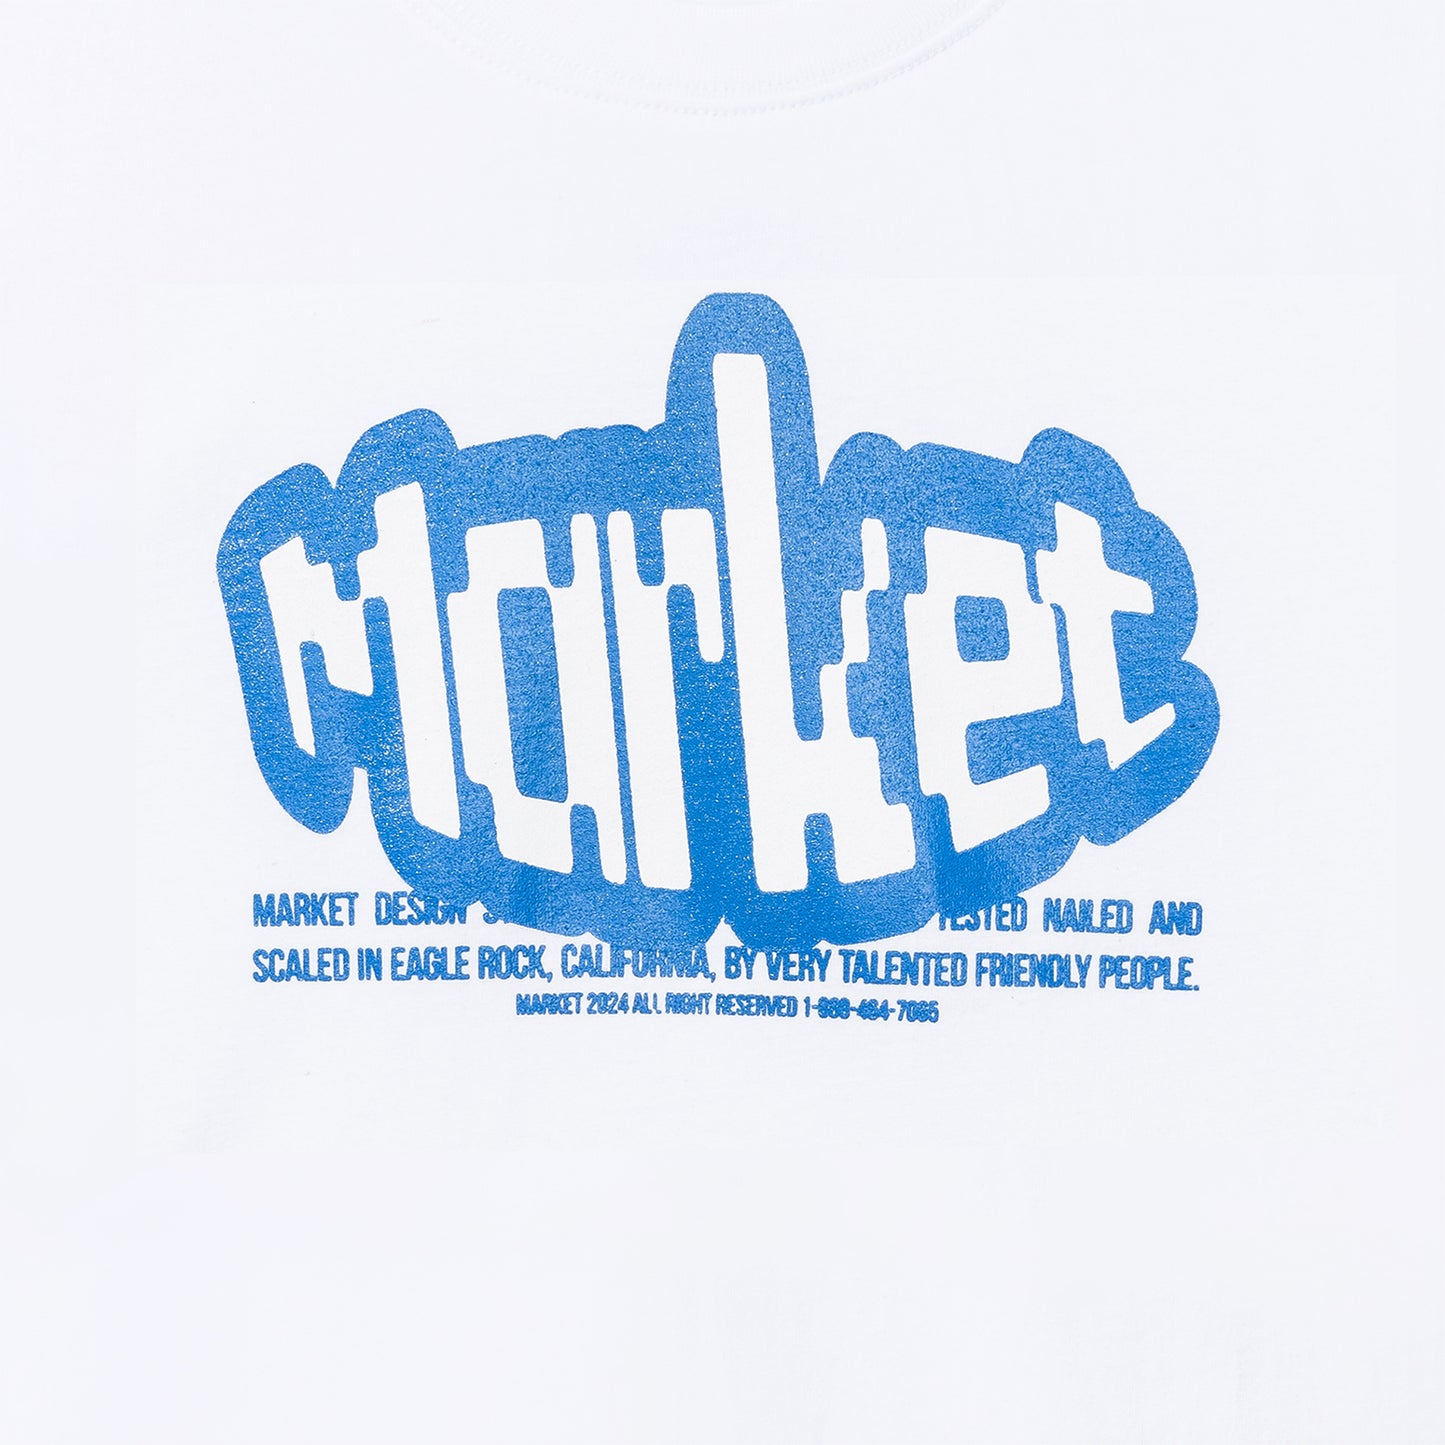 MARKET clothing brand TEST NAIL SCALE T-SHIRT. Find more graphic tees, hats, hoodies and more at MarketStudios.com. Formally Chinatown Market.